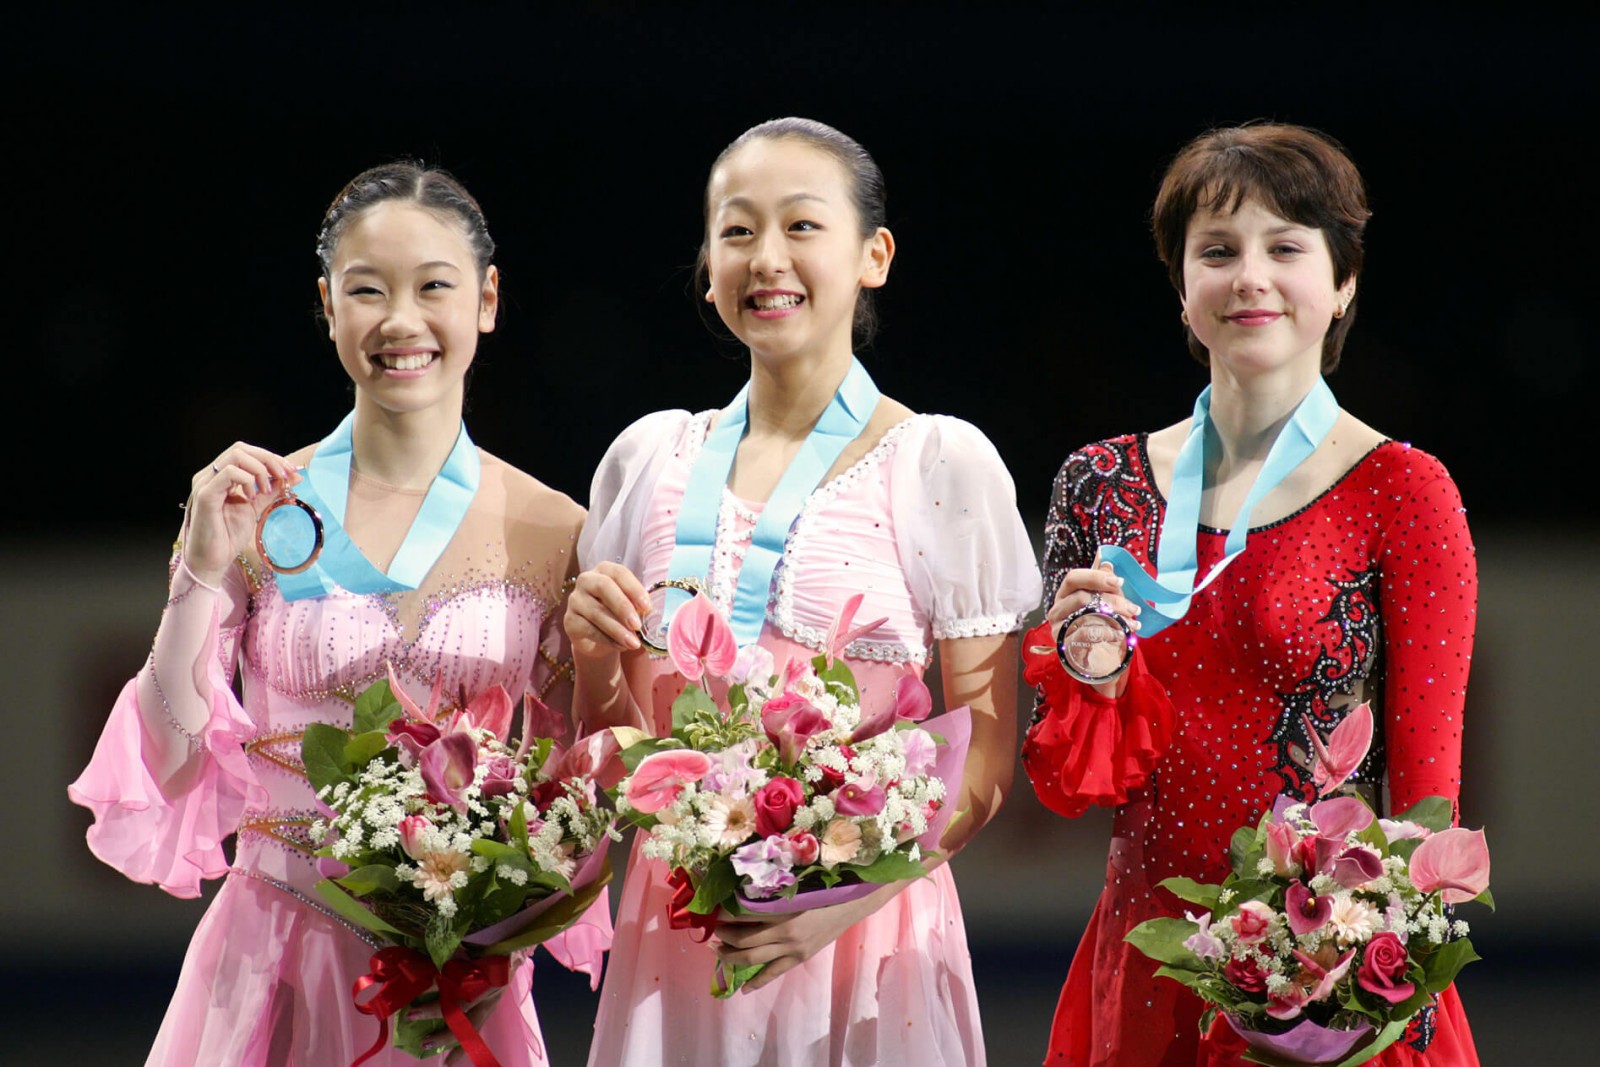 Asada won the Grand Prix of Figure Skating Final in December 2005, defeating Irina Slutskaya of Russia, right, considered a leading contender for the gold medal at the Torino Winter Games, held just two months later. 